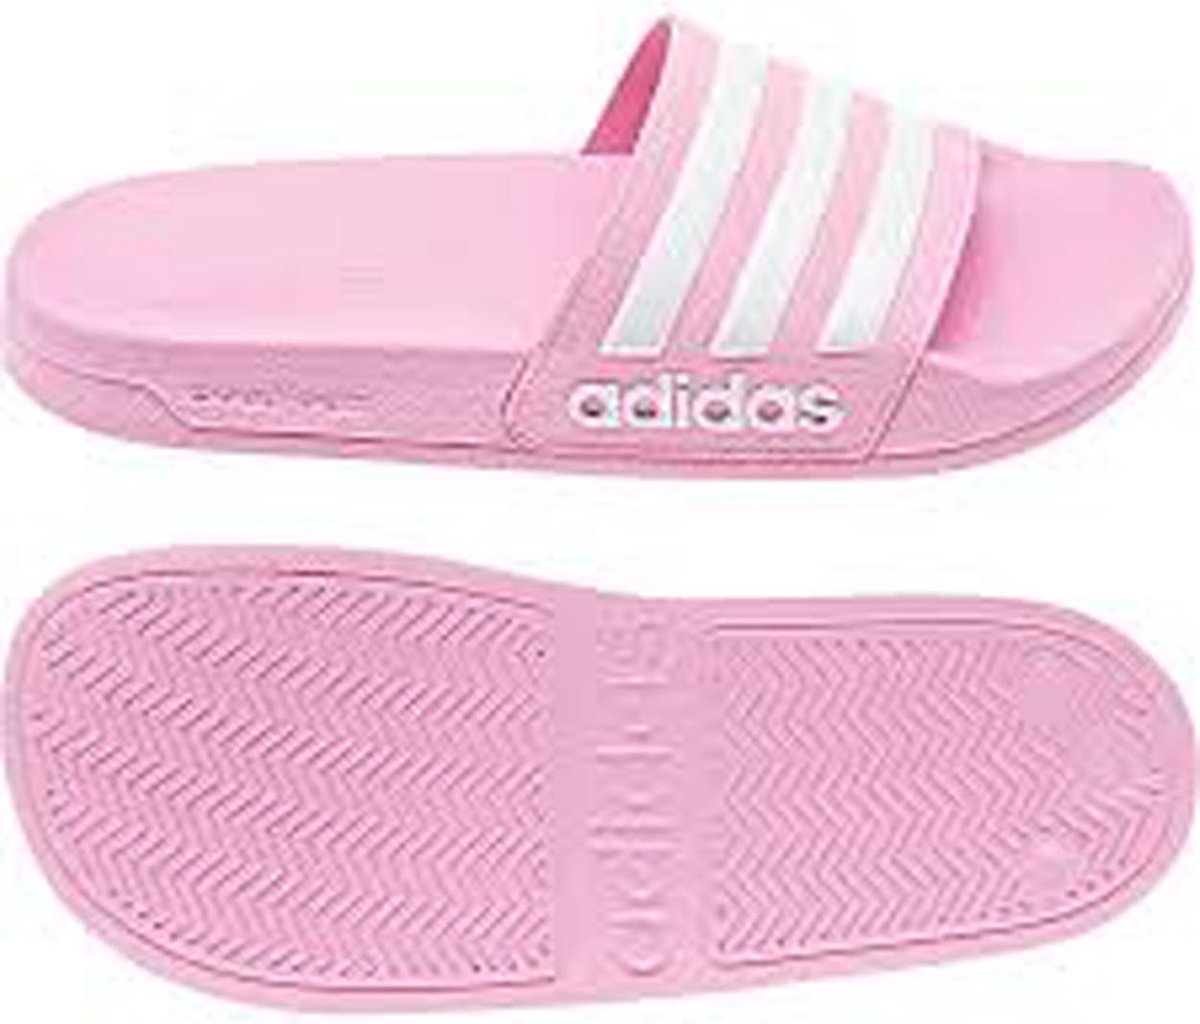 roze adidas slippers Off 52% - www.bashhguidelines.org